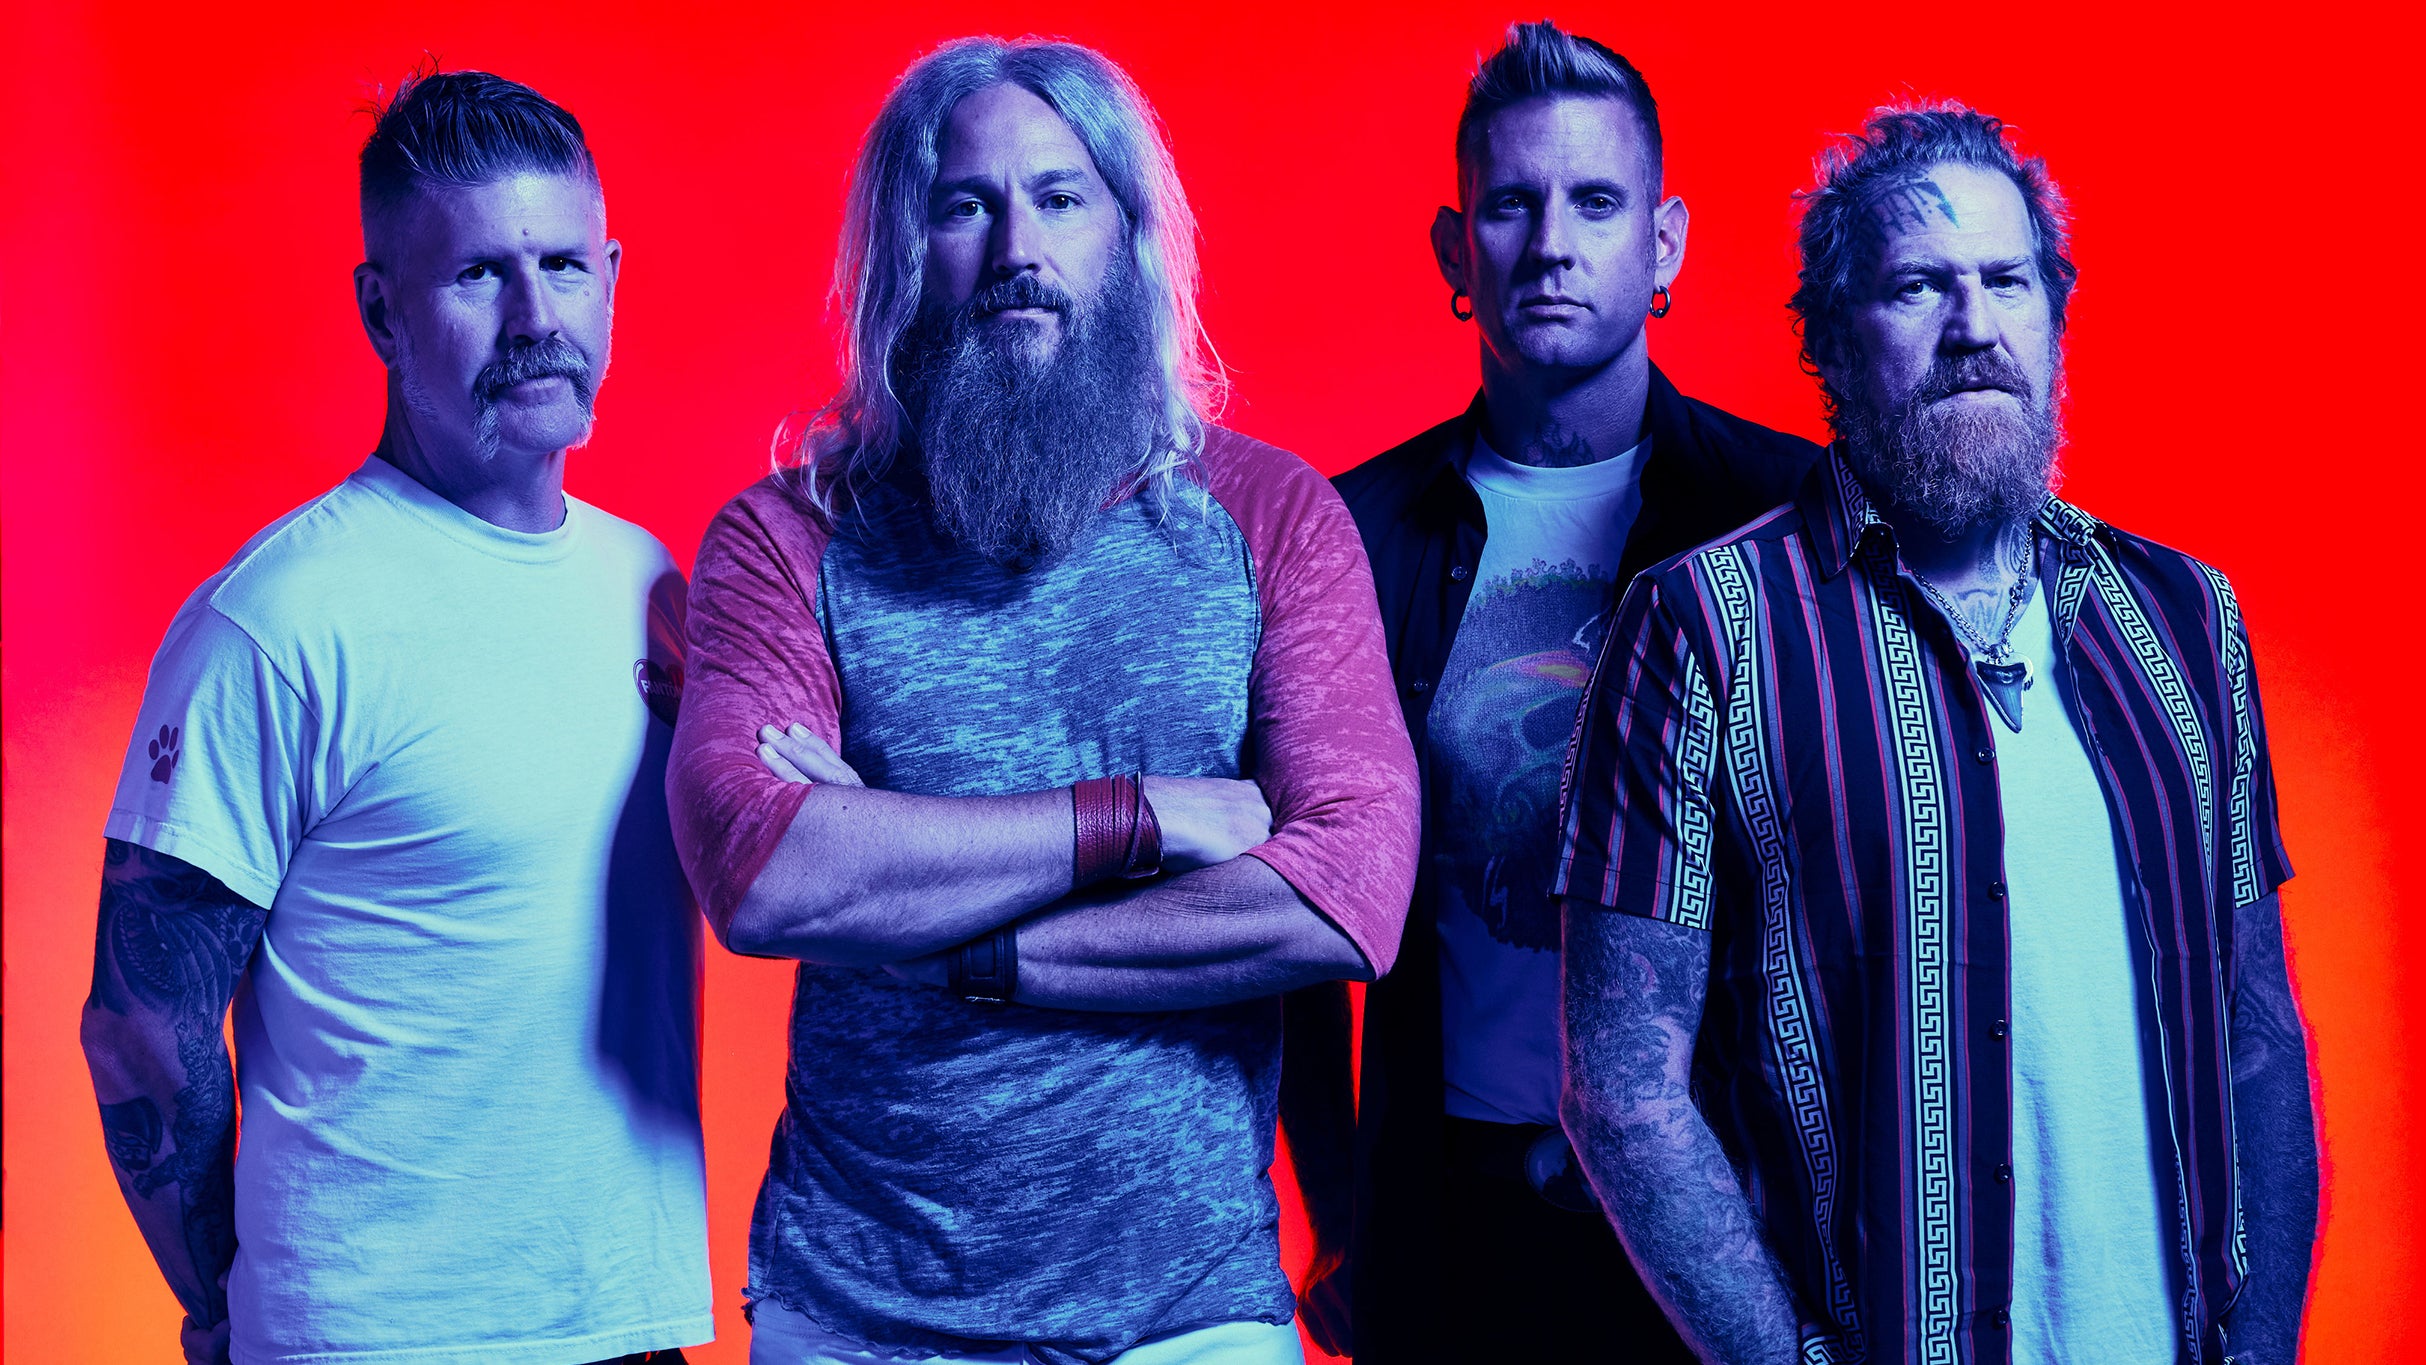 The Mega-Monsters Tour: Mastodon & Gojira w/ special guest Lorna Shore free presale code for early tickets in Chesterfield